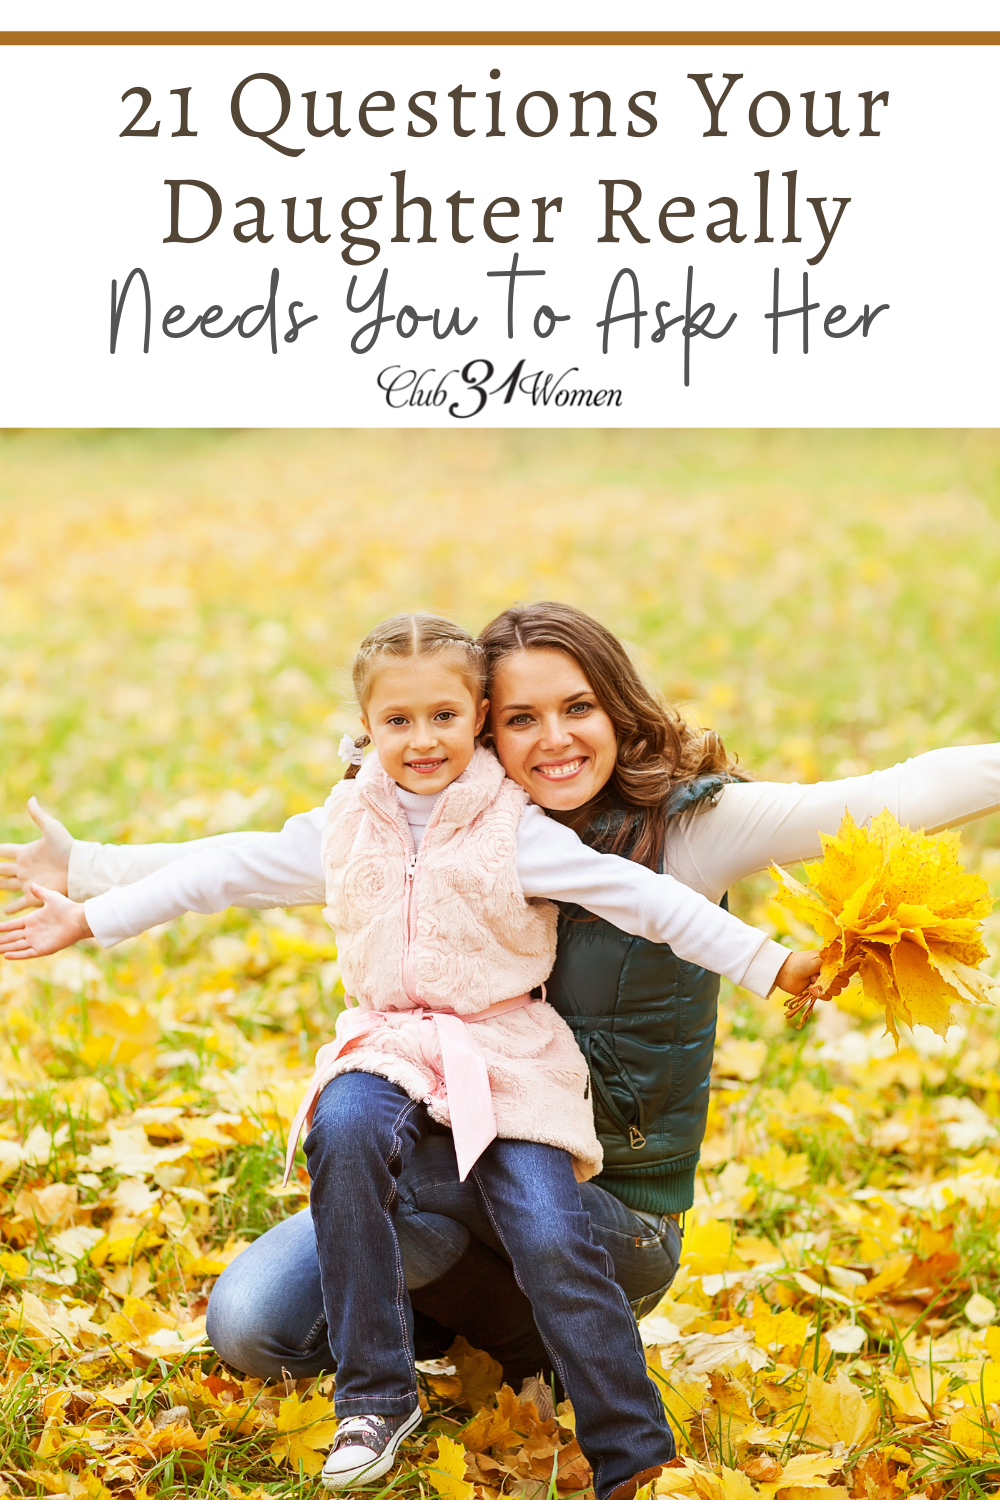 How does a mother grow close with her daughter? How do you get to know her heart? Here are 21 thoughtful questions she really needs you to ask! via @Club31Women